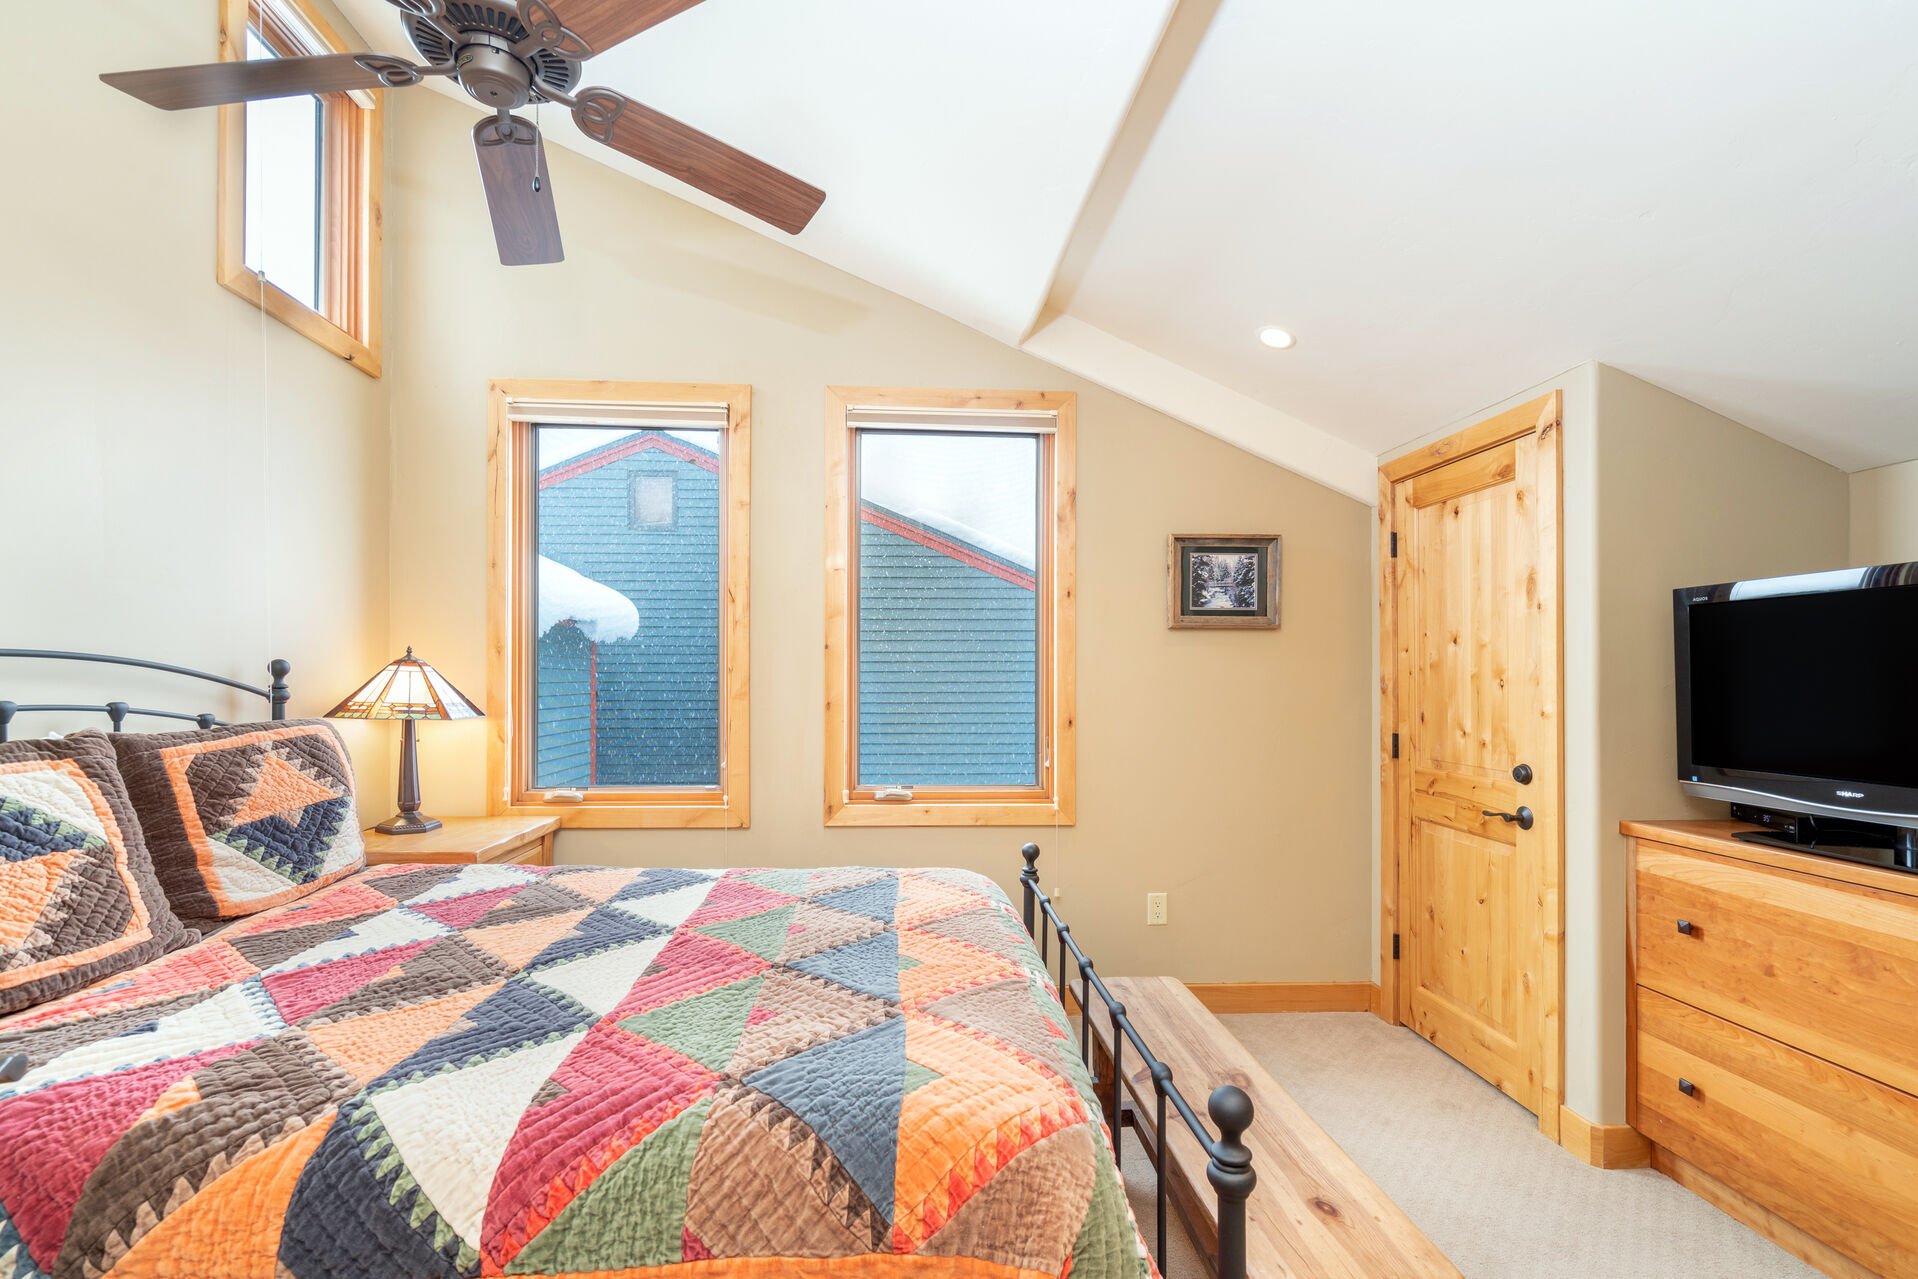 Bedroom of this 2 bedroom condo in Telluride with ceiling fan, dresser, and TV around a large bed.